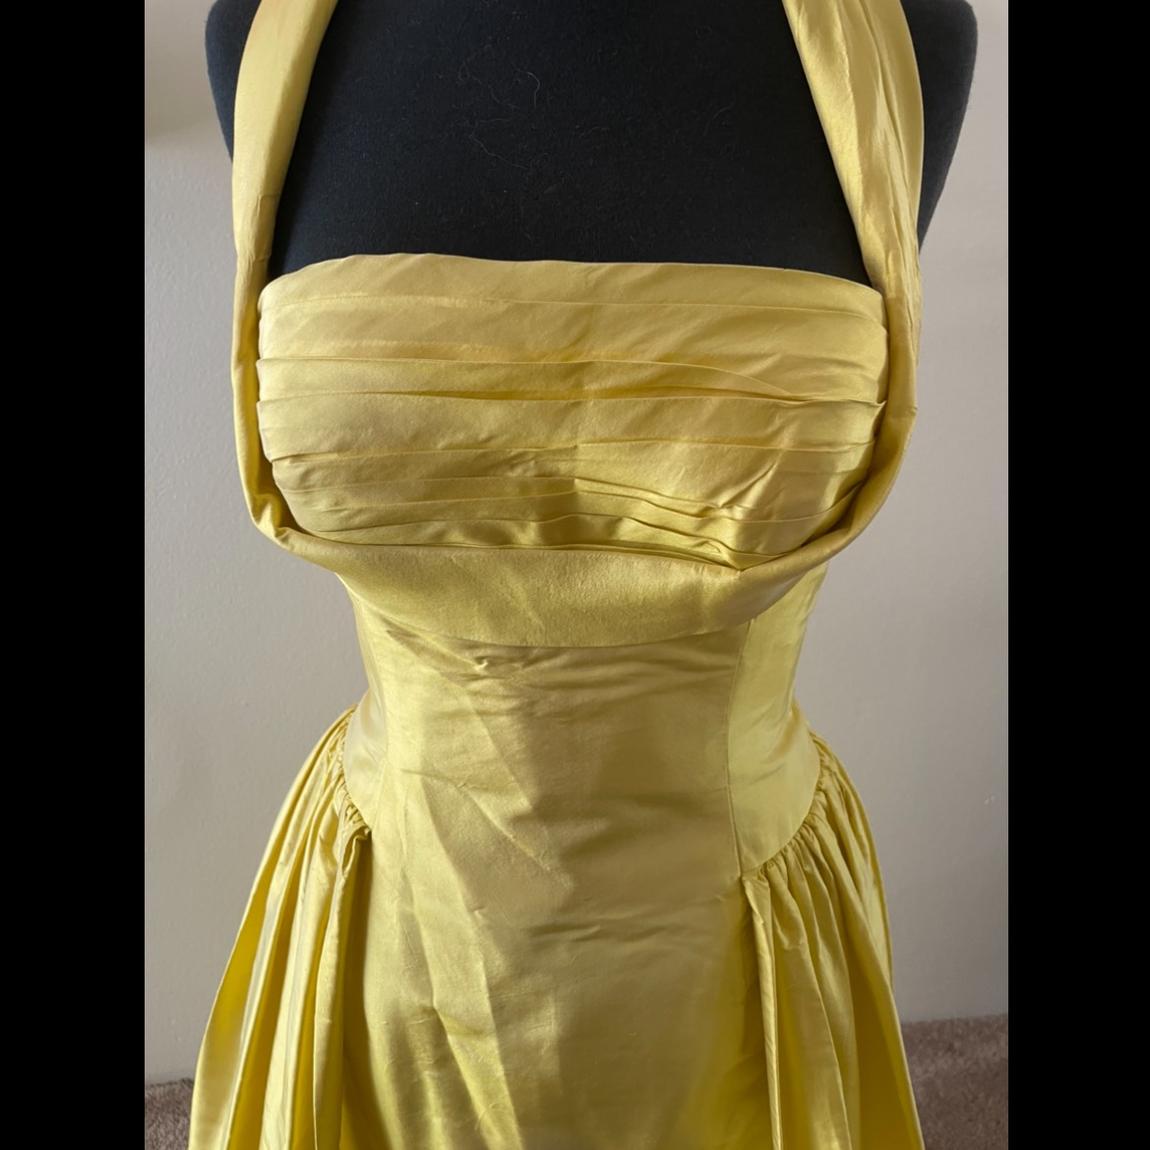 Sherri Hill Size 4 Halter Yellow Dress With Train on Queenly